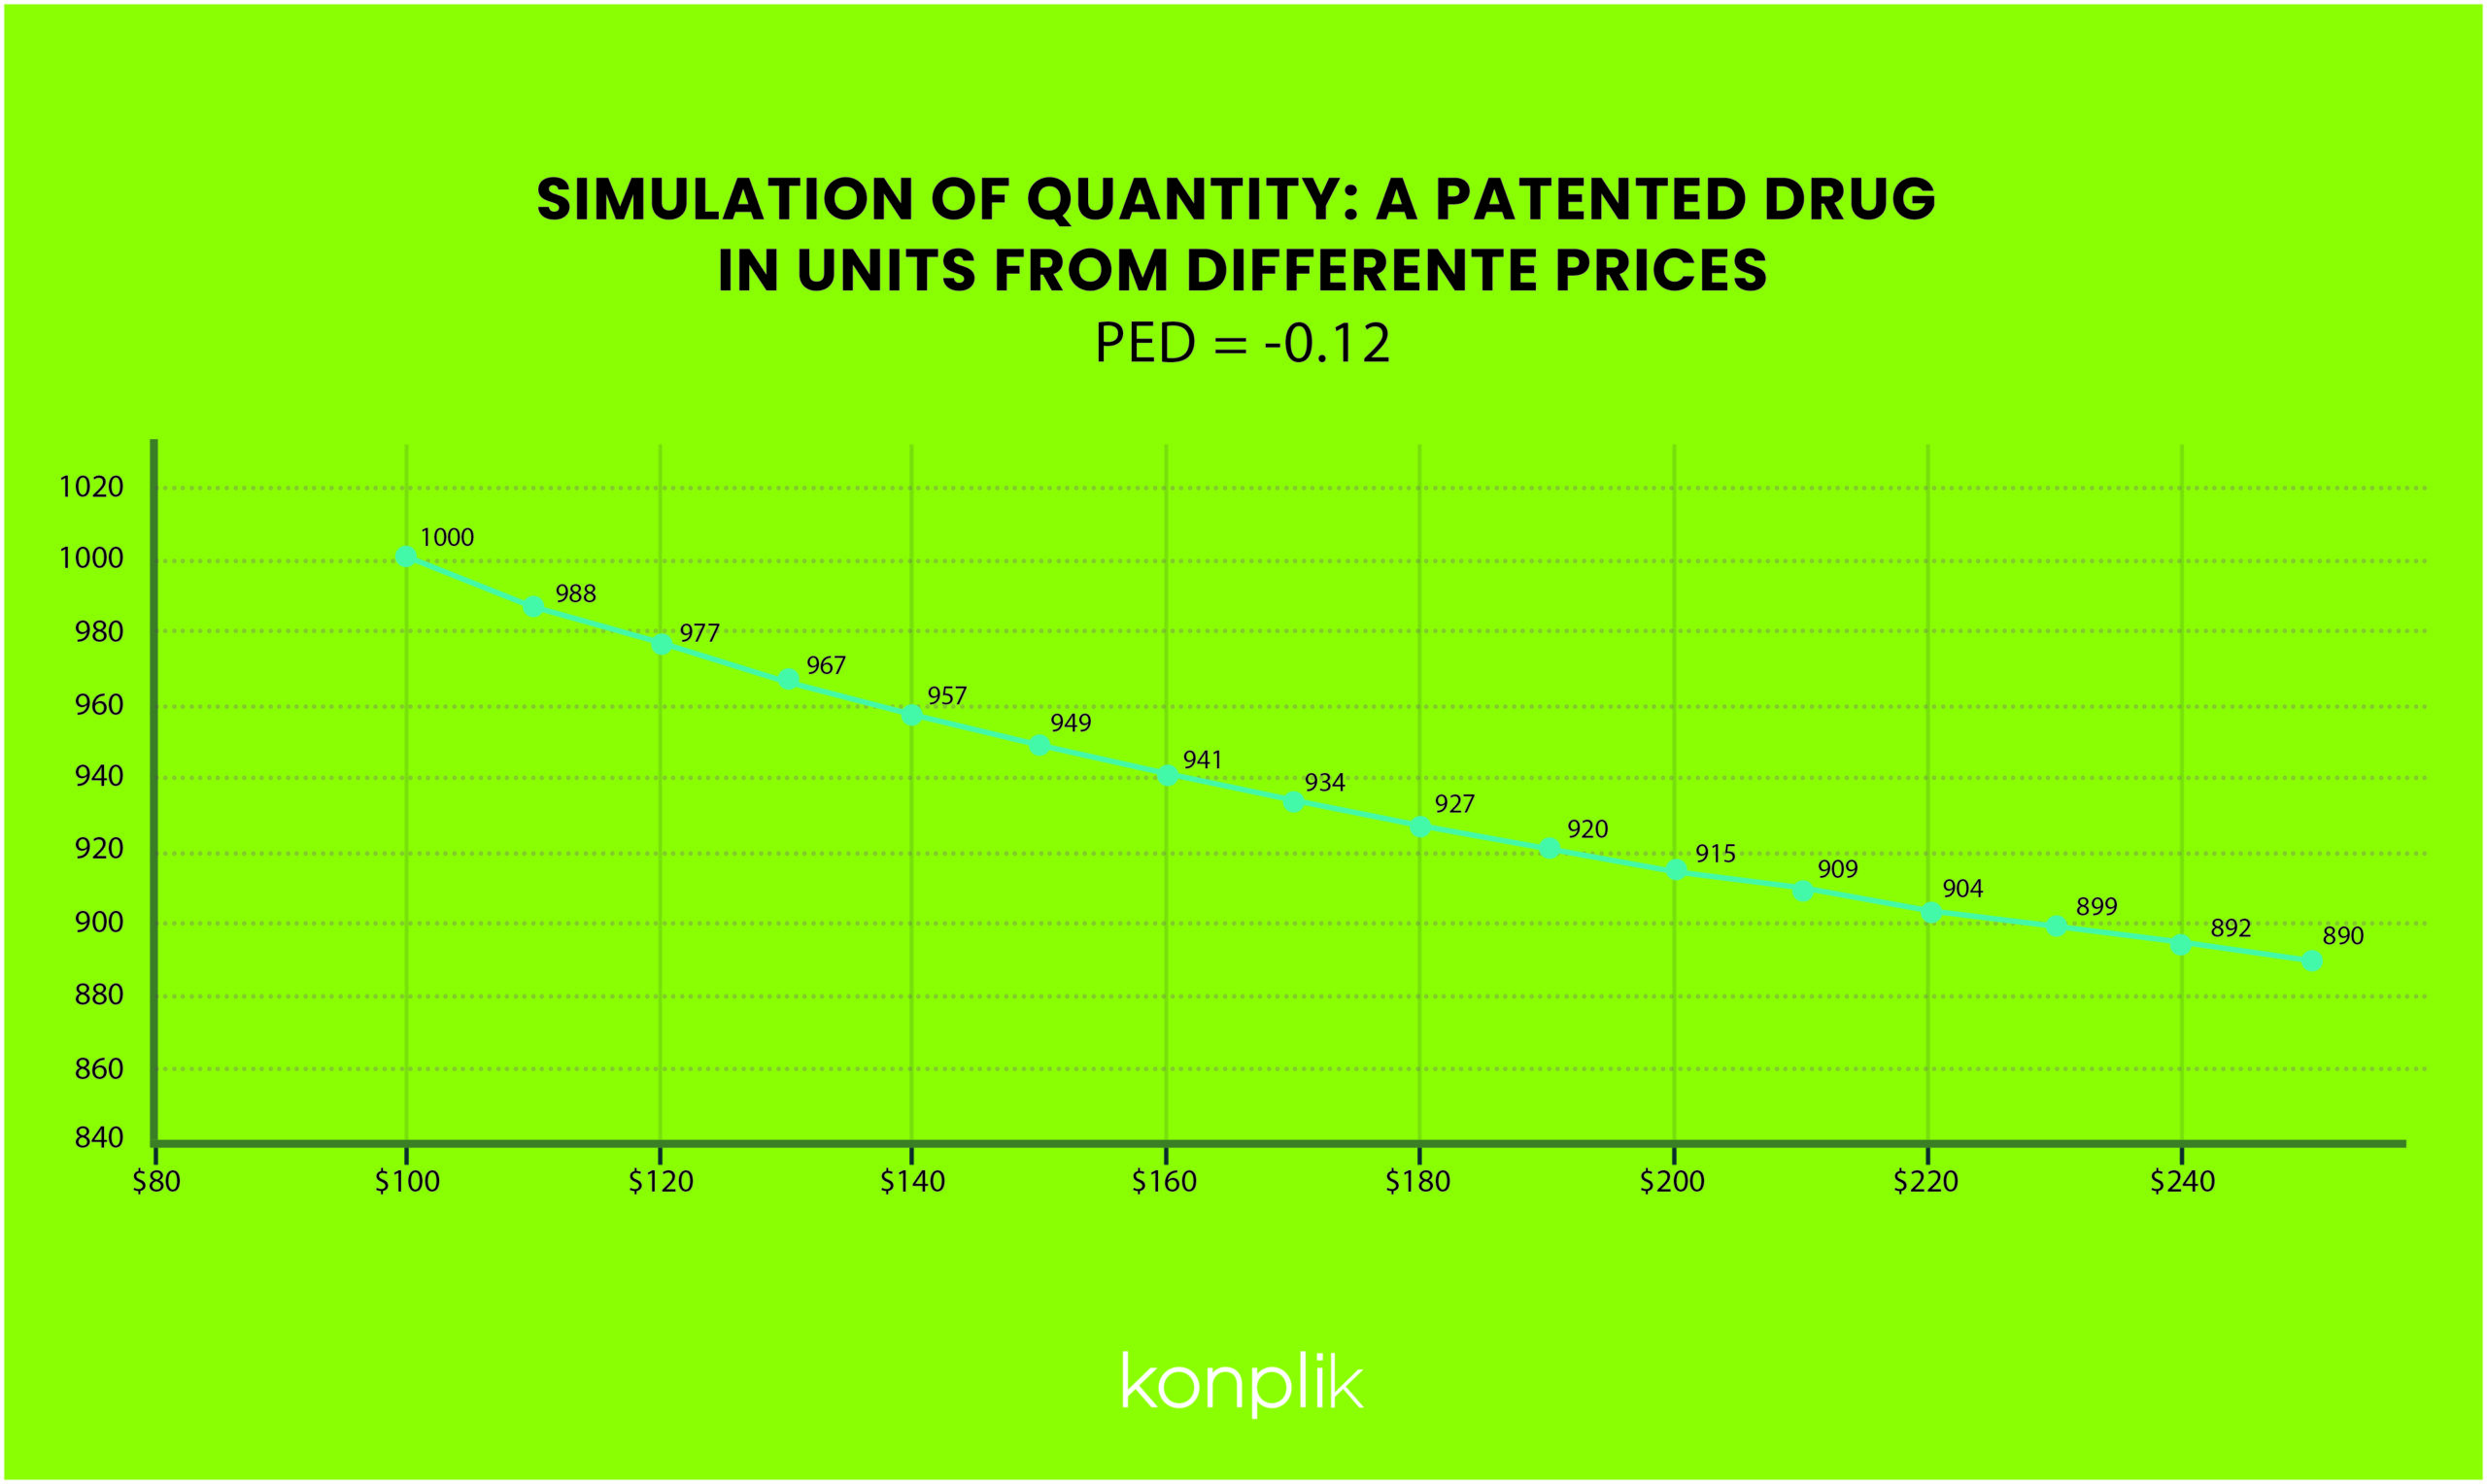 graph showing the simulation of quantities from different prices